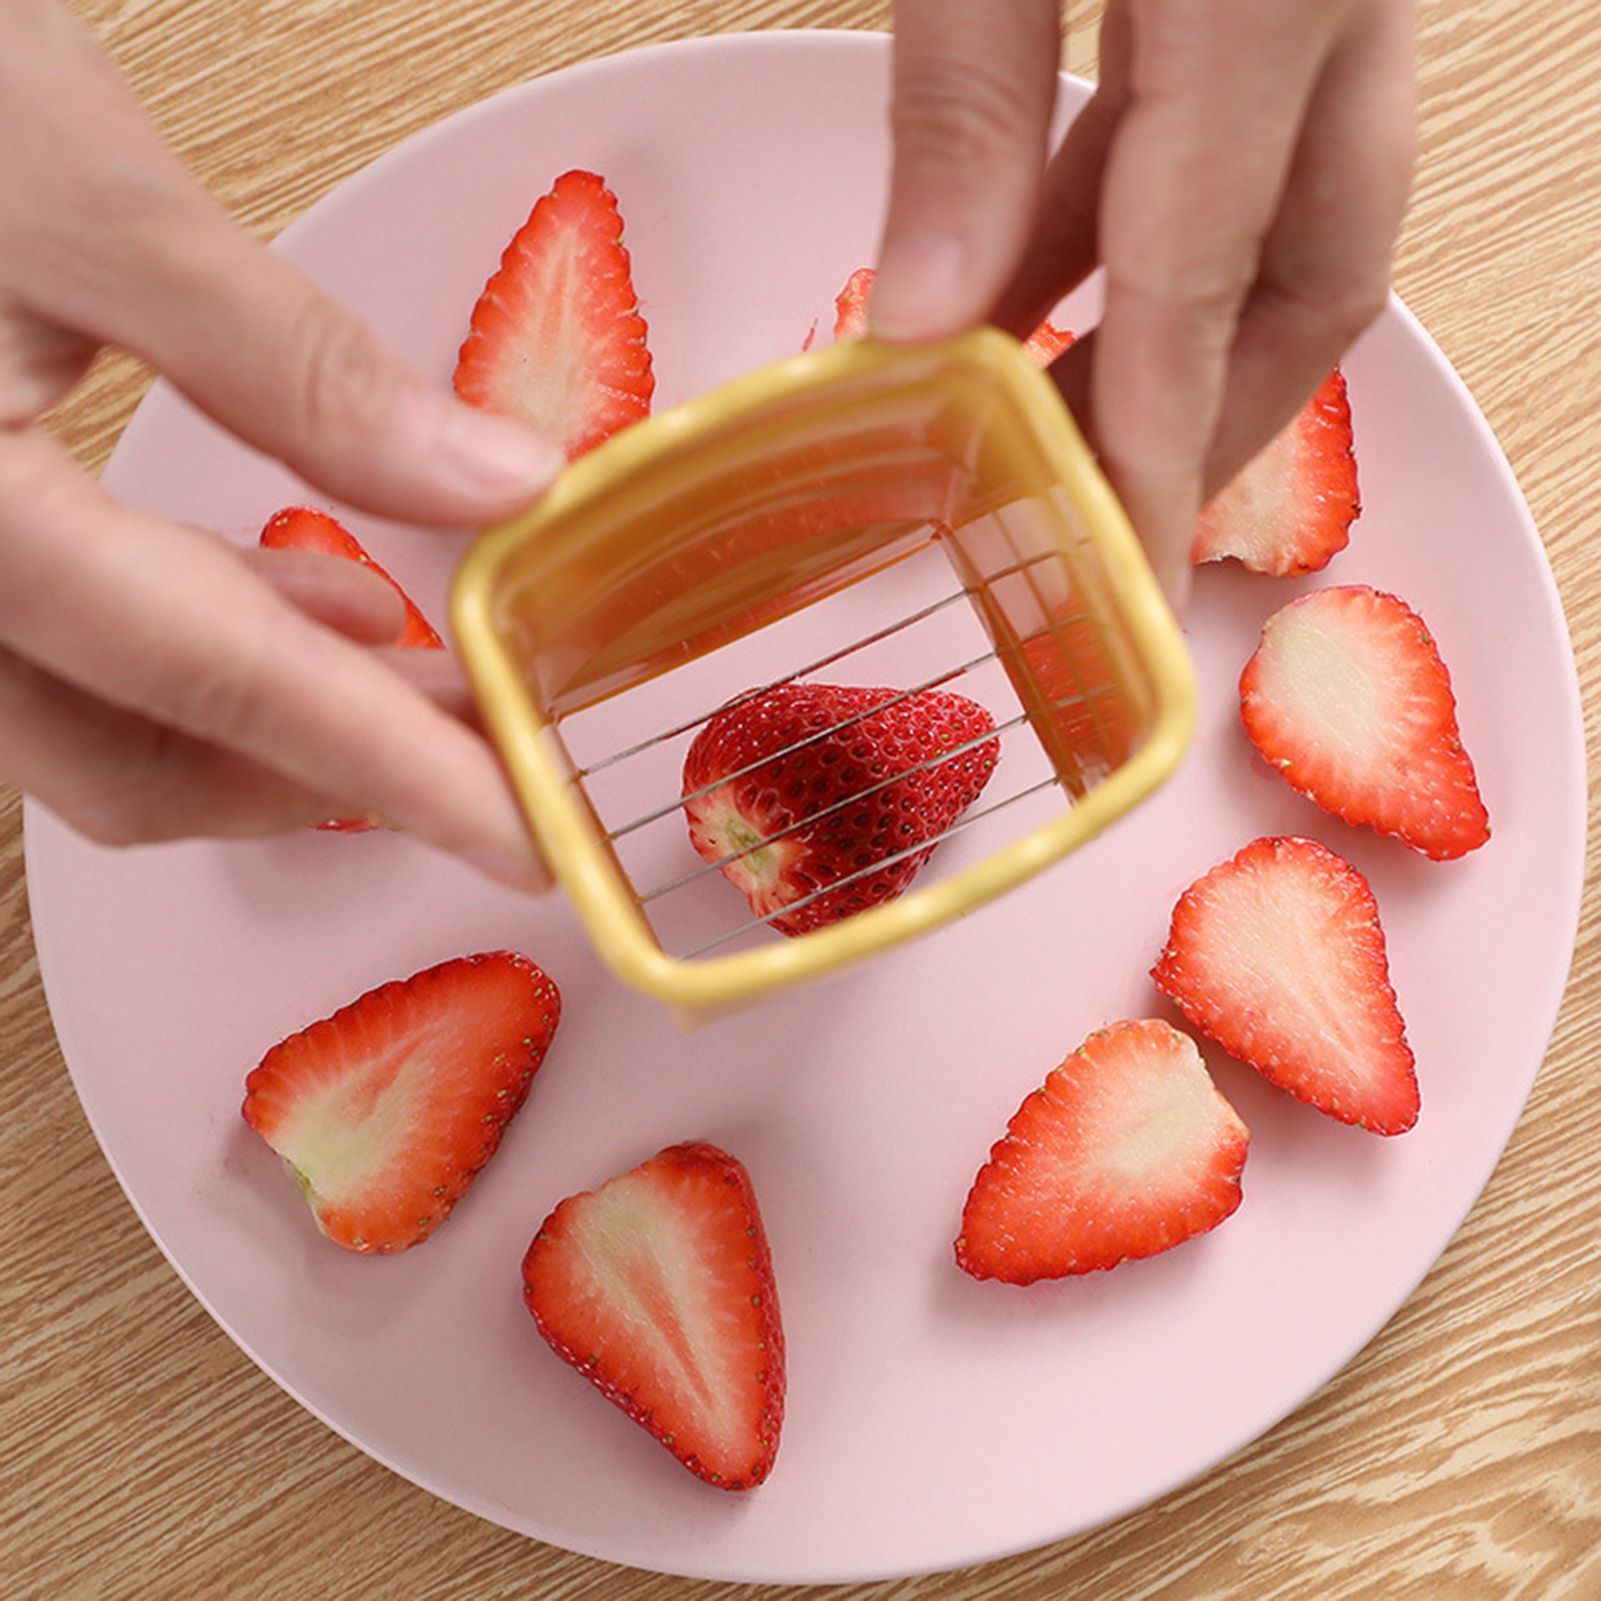 Strawberry Dividers. Cup sliced